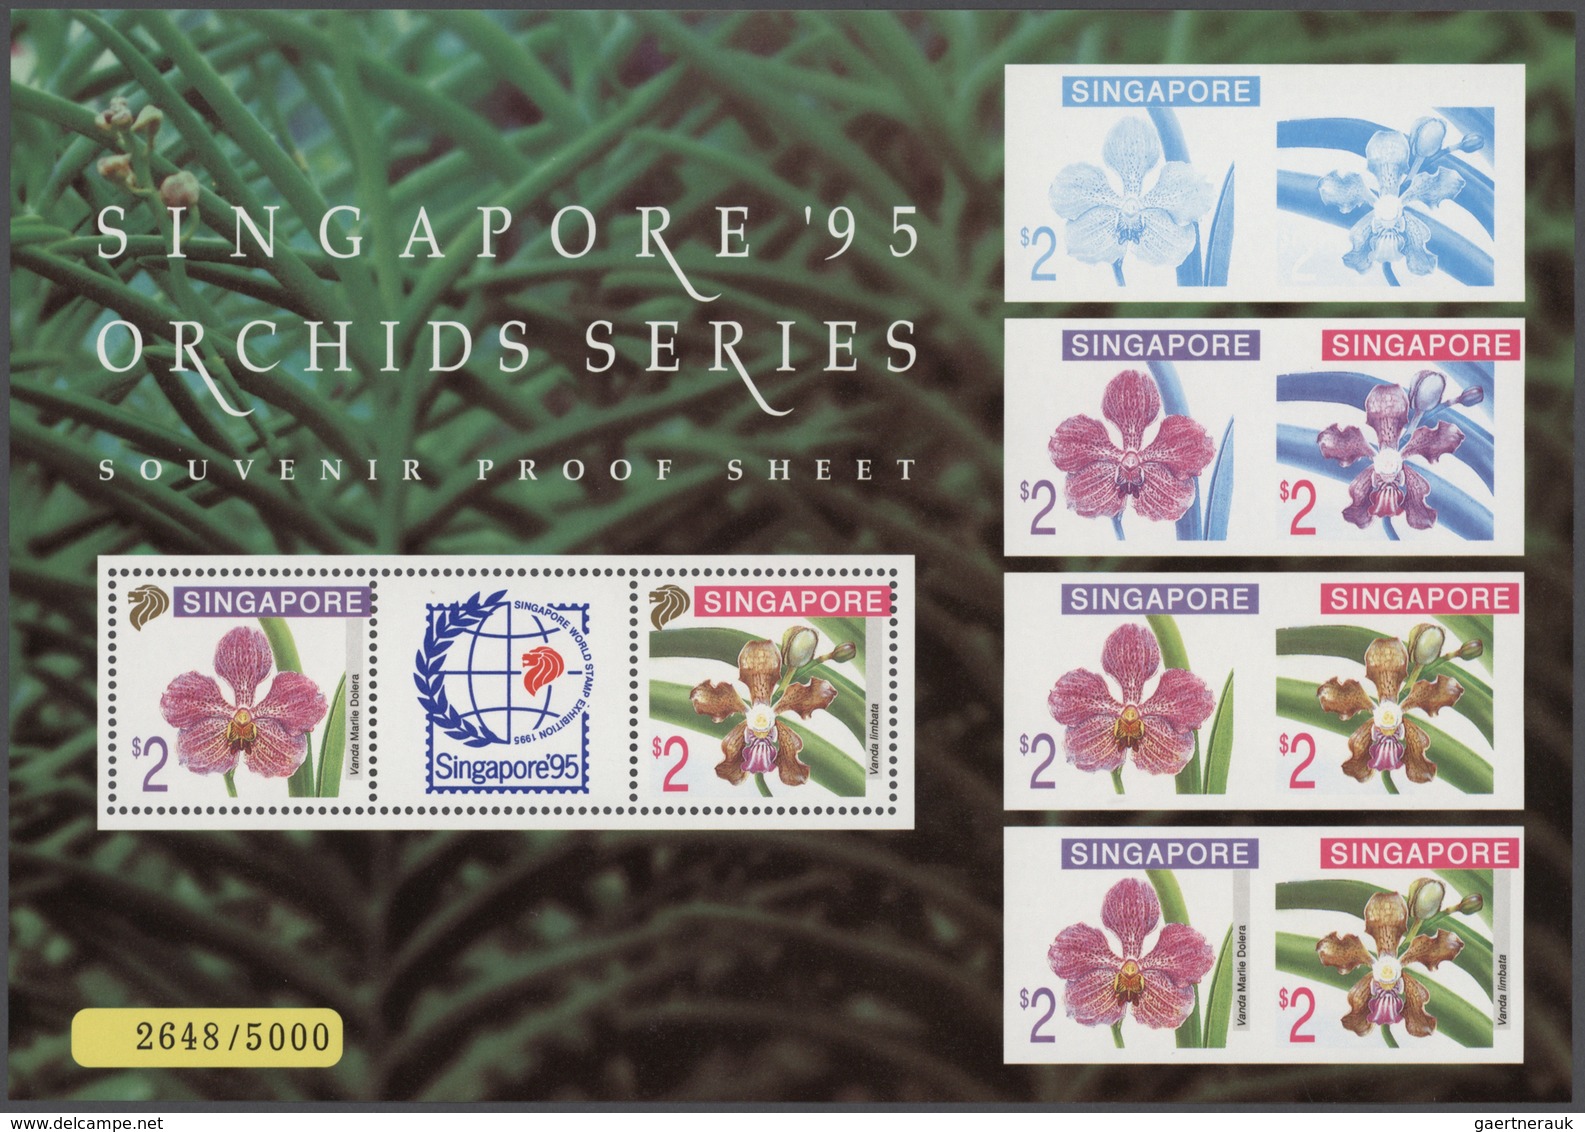 Singapur: 1995 Singapore Stamp Exhibition: Three Exhibition Folders Containg Orchids Stamps And Mini - Singapur (...-1959)